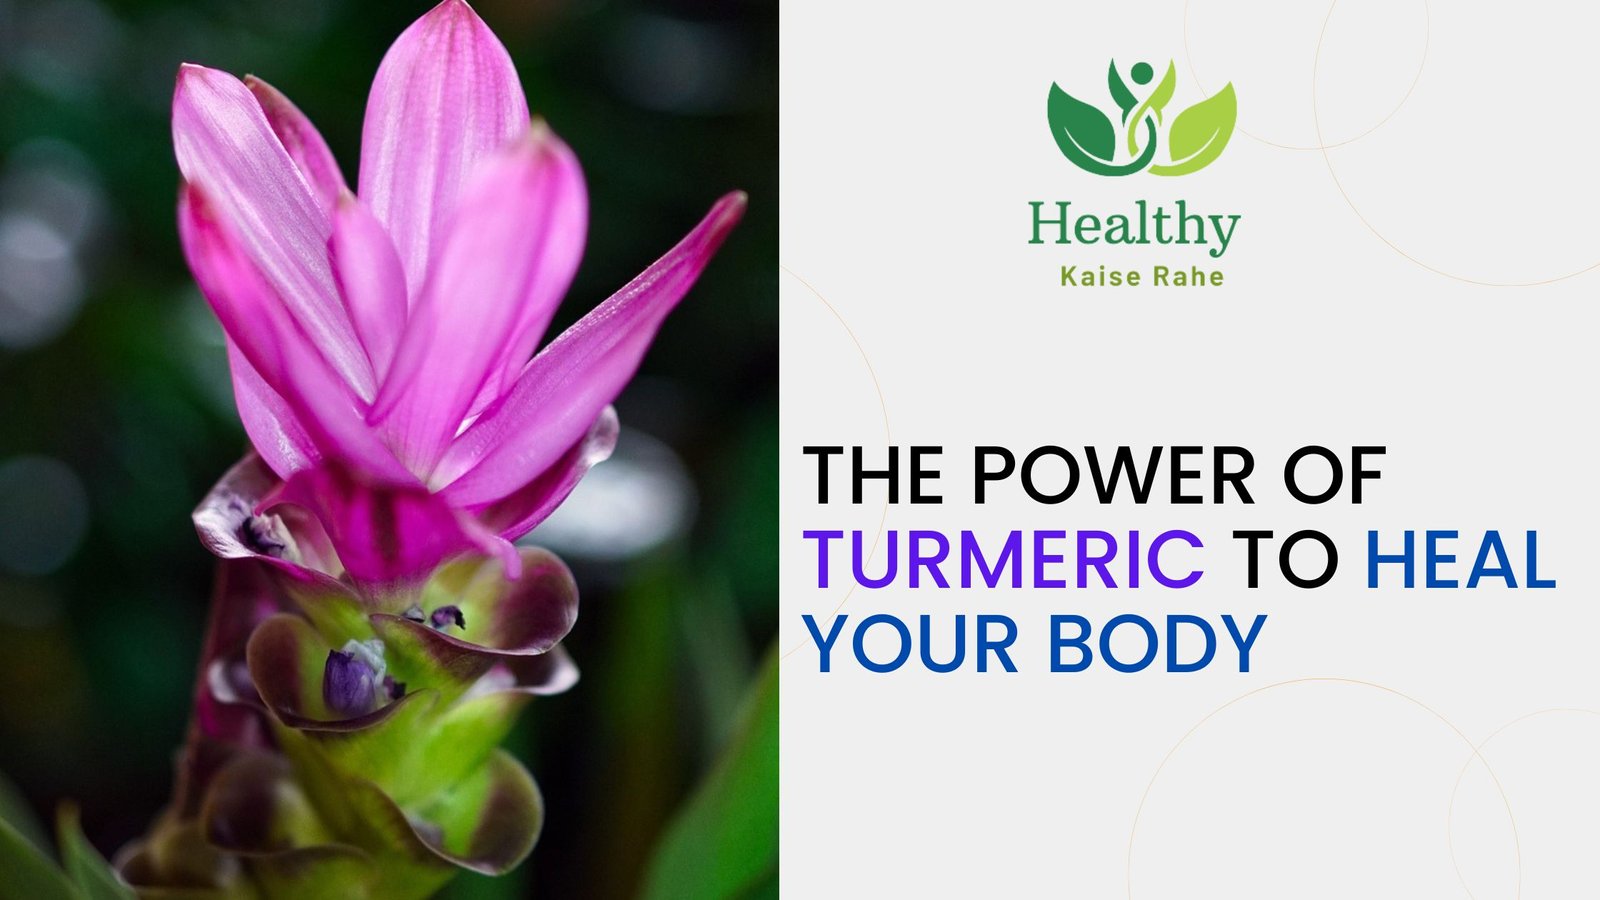 The Power of TURMERIC to Heal Your Body